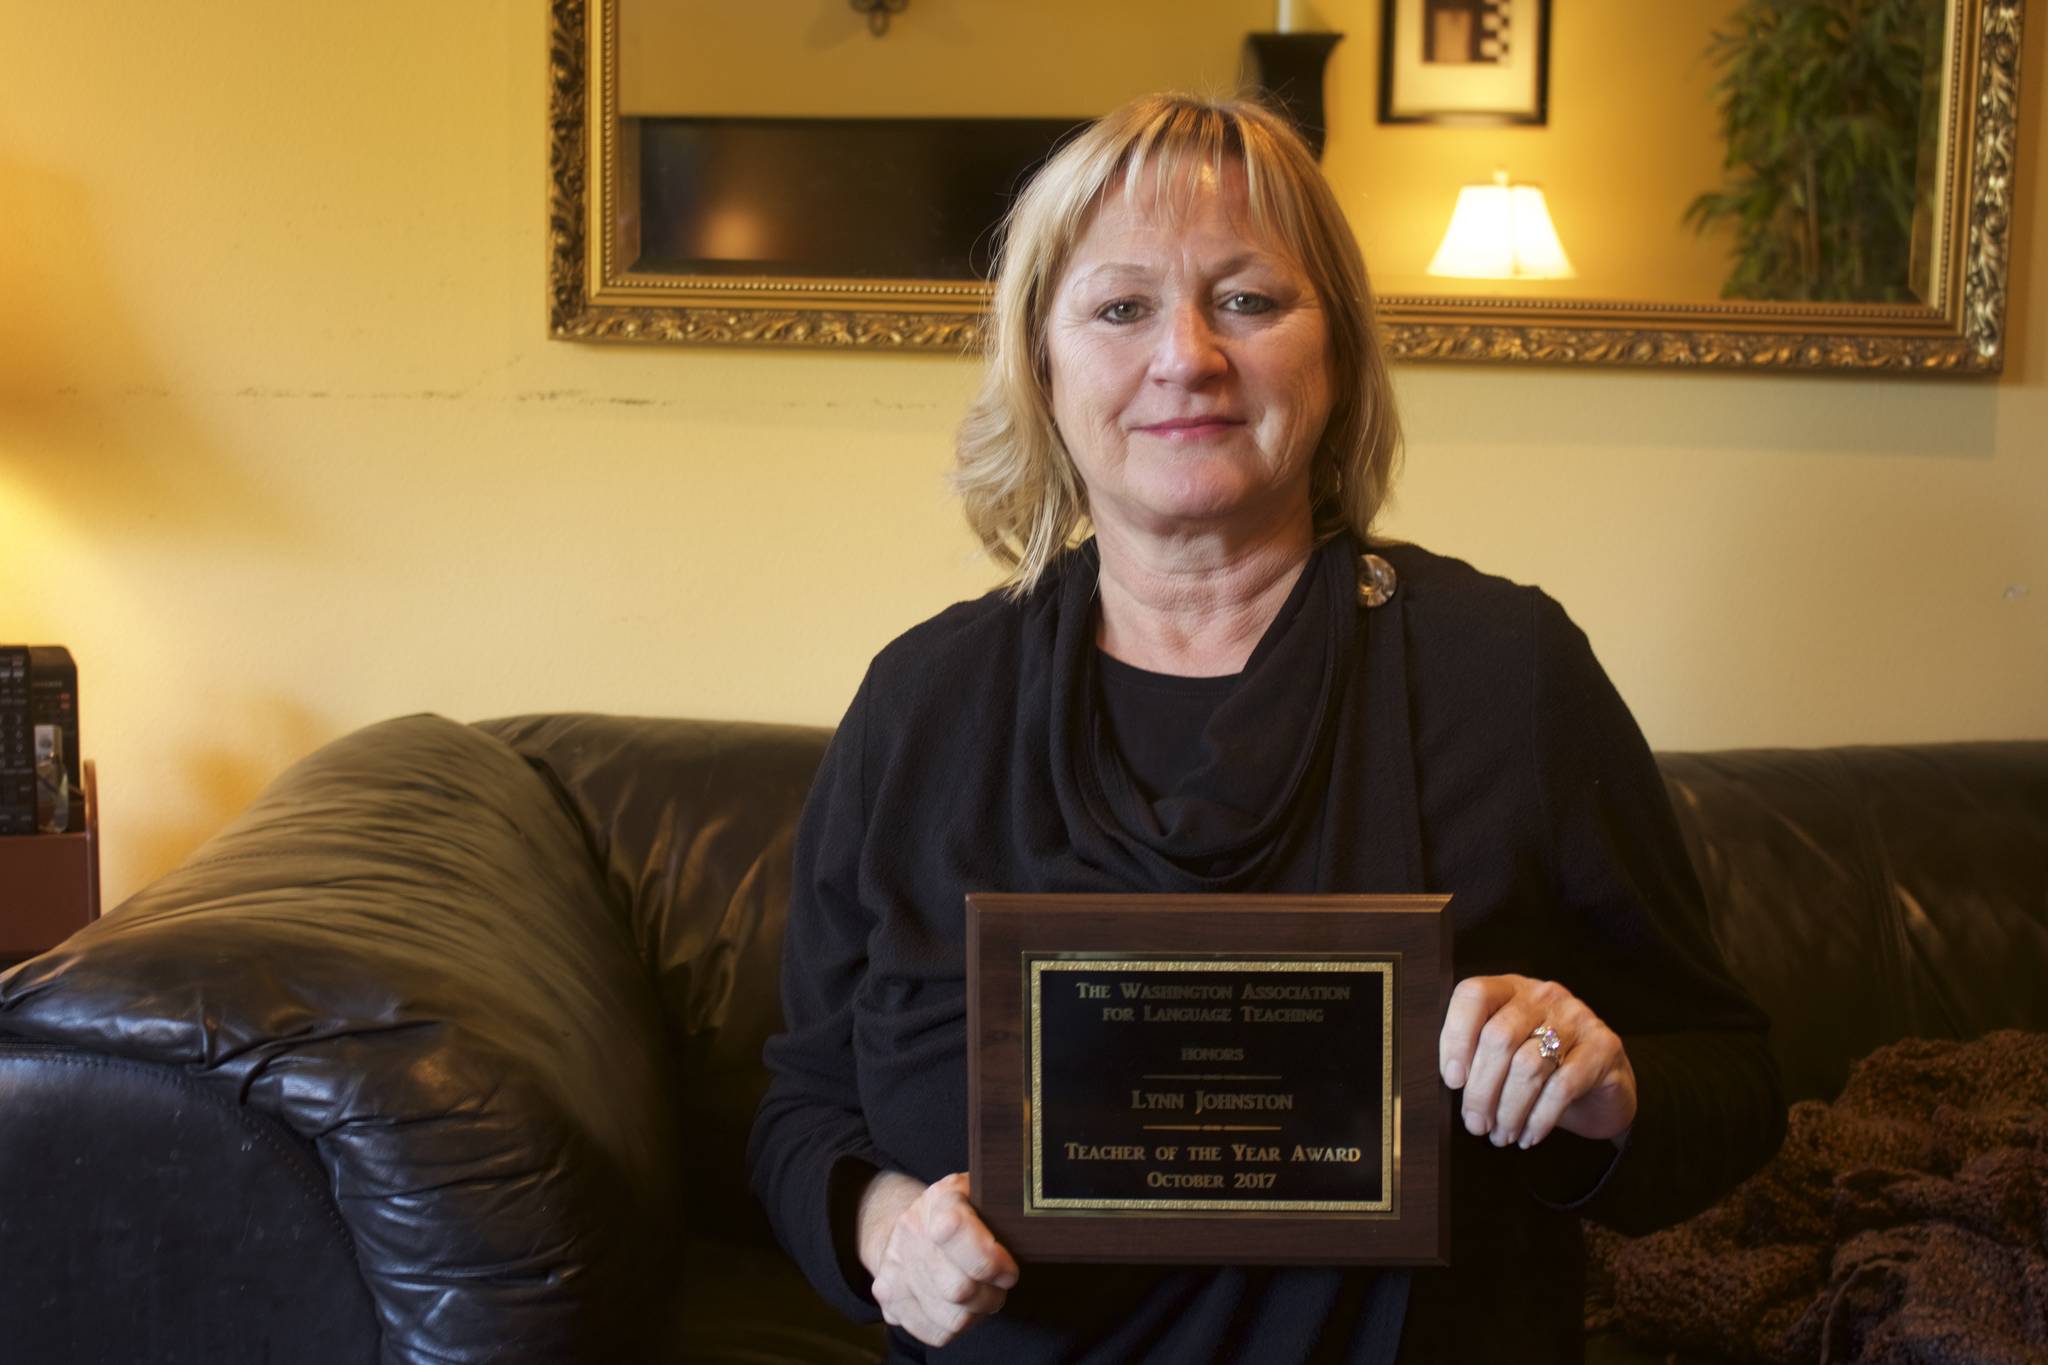 Bothell resident Lynn Johnston, 57, is this year’s foreign language Teacher of the Year for Washington. She has taught Spanish and French at Alderwood Middle School for 27 years. Courtesy of Aaron Huang